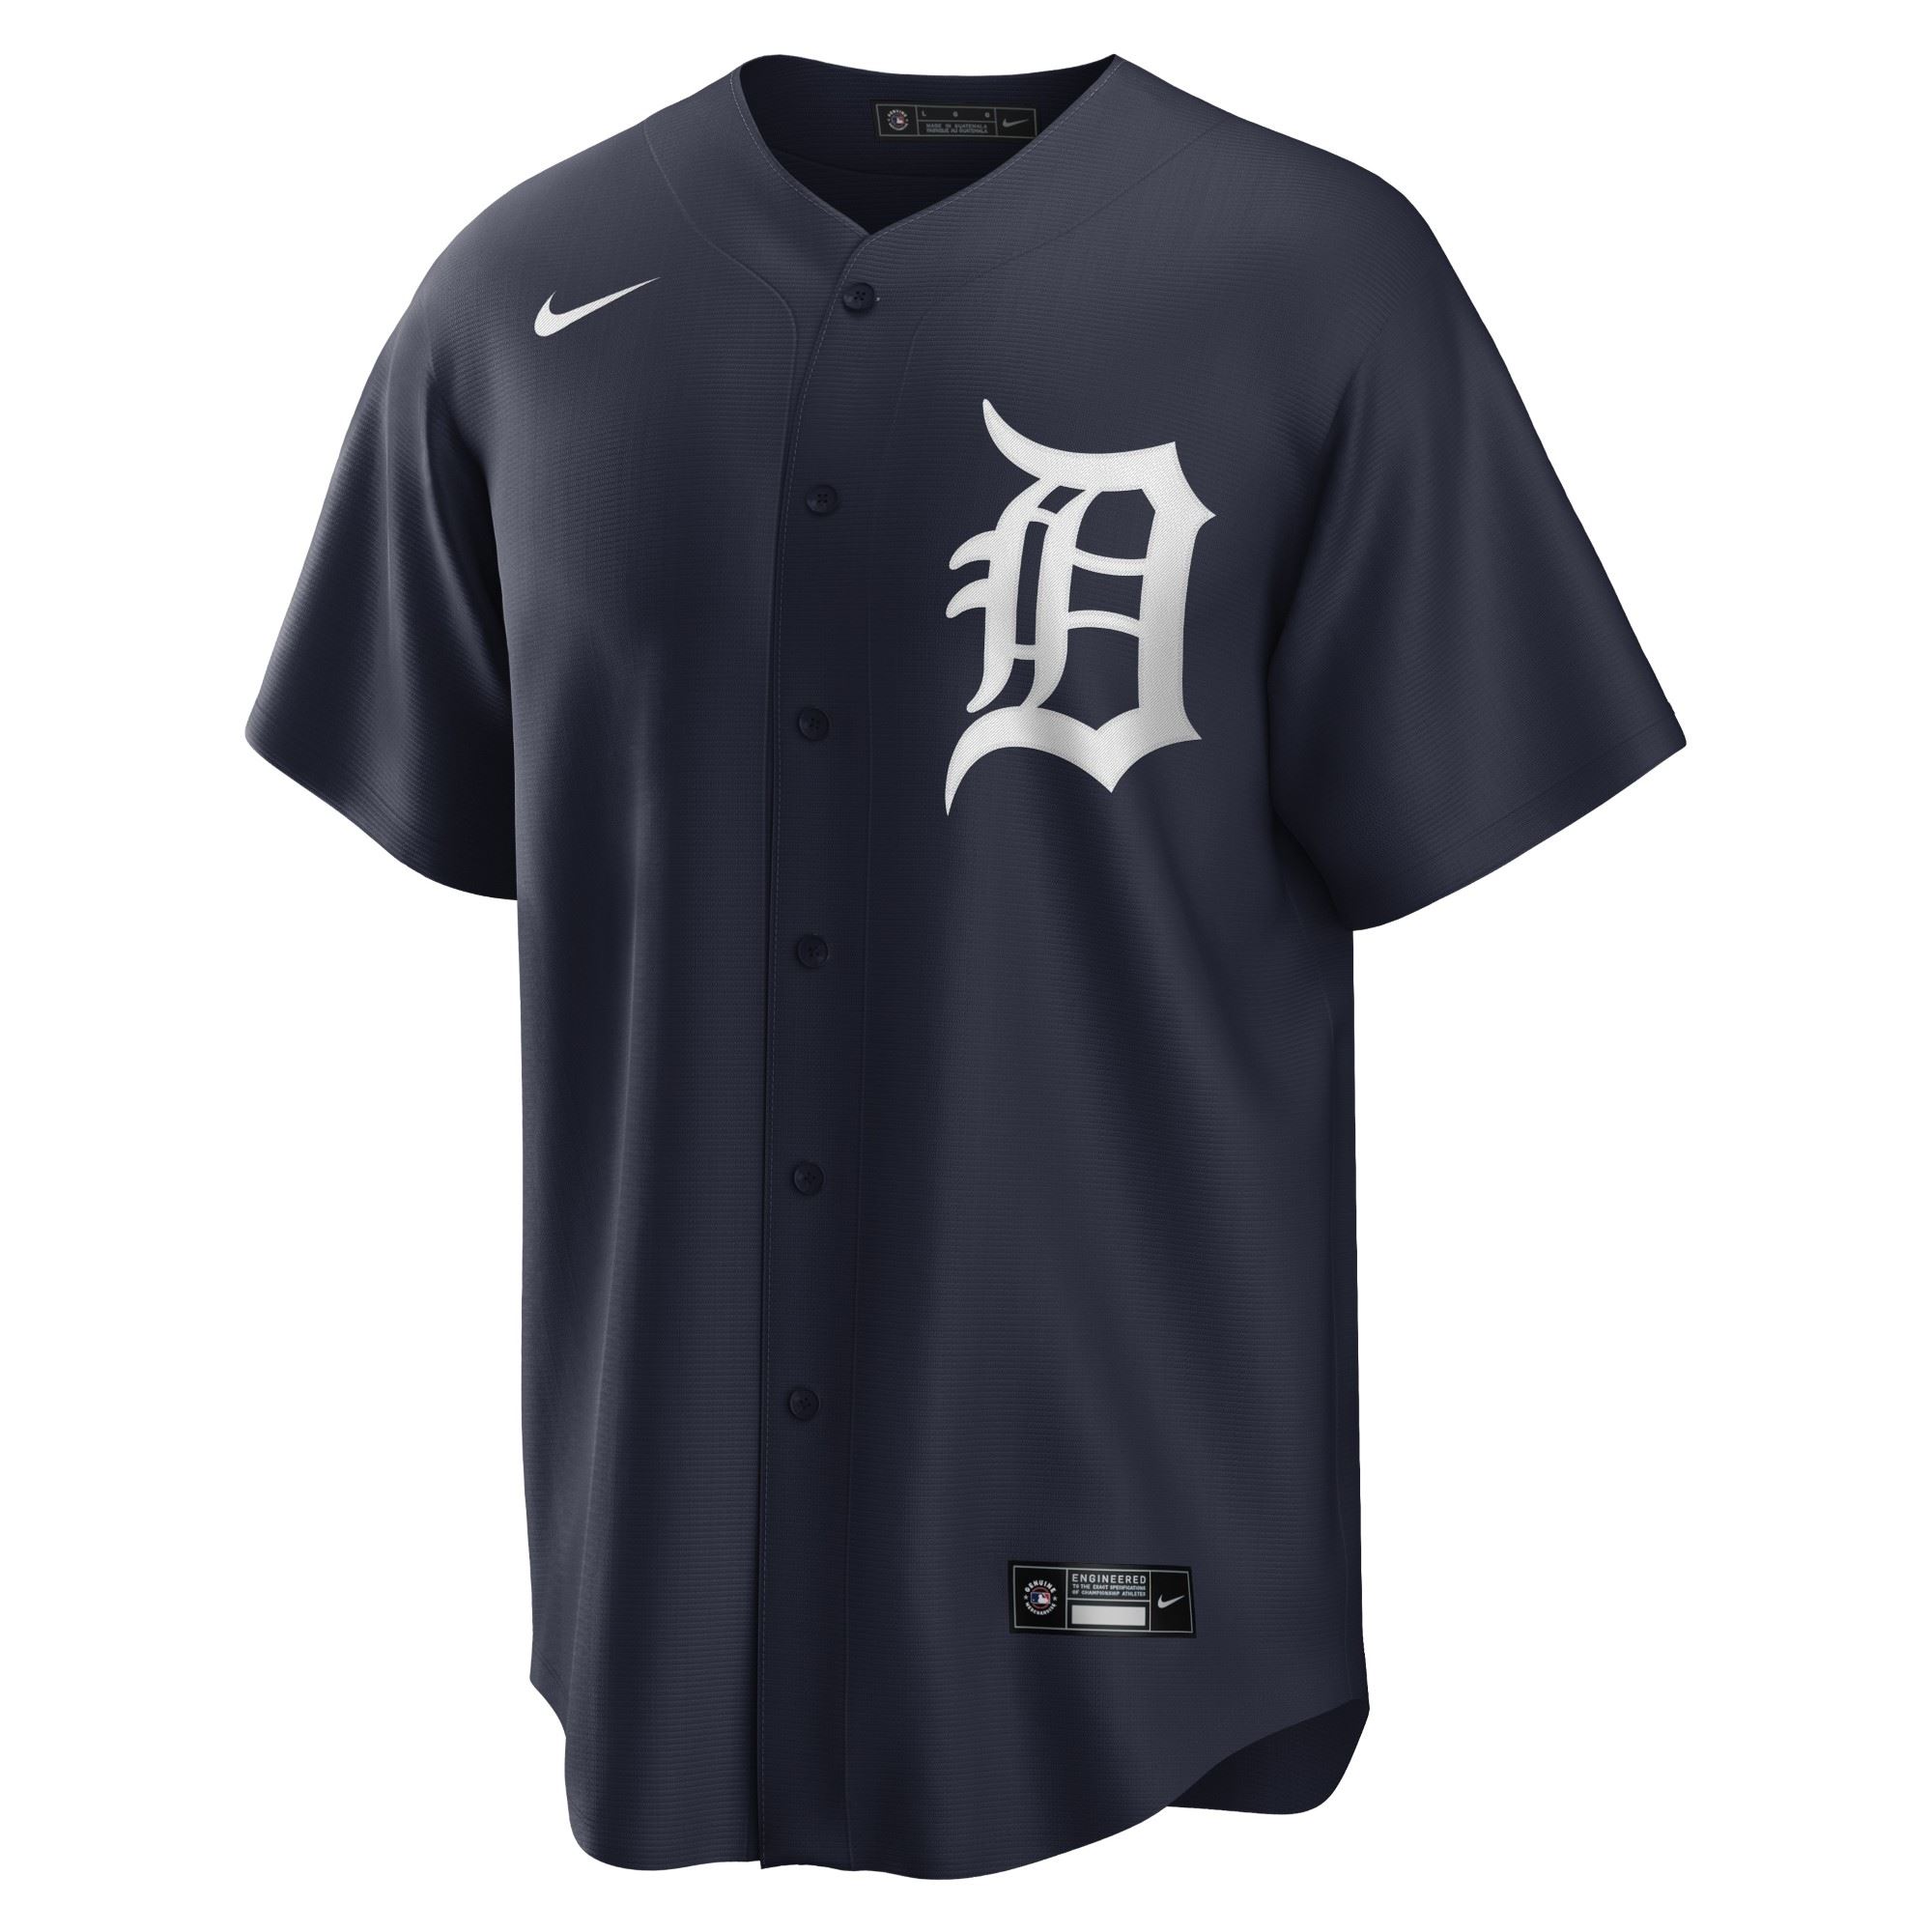 Detroit Tigers Navy Official MLB Replica Alternate Jersey Nike